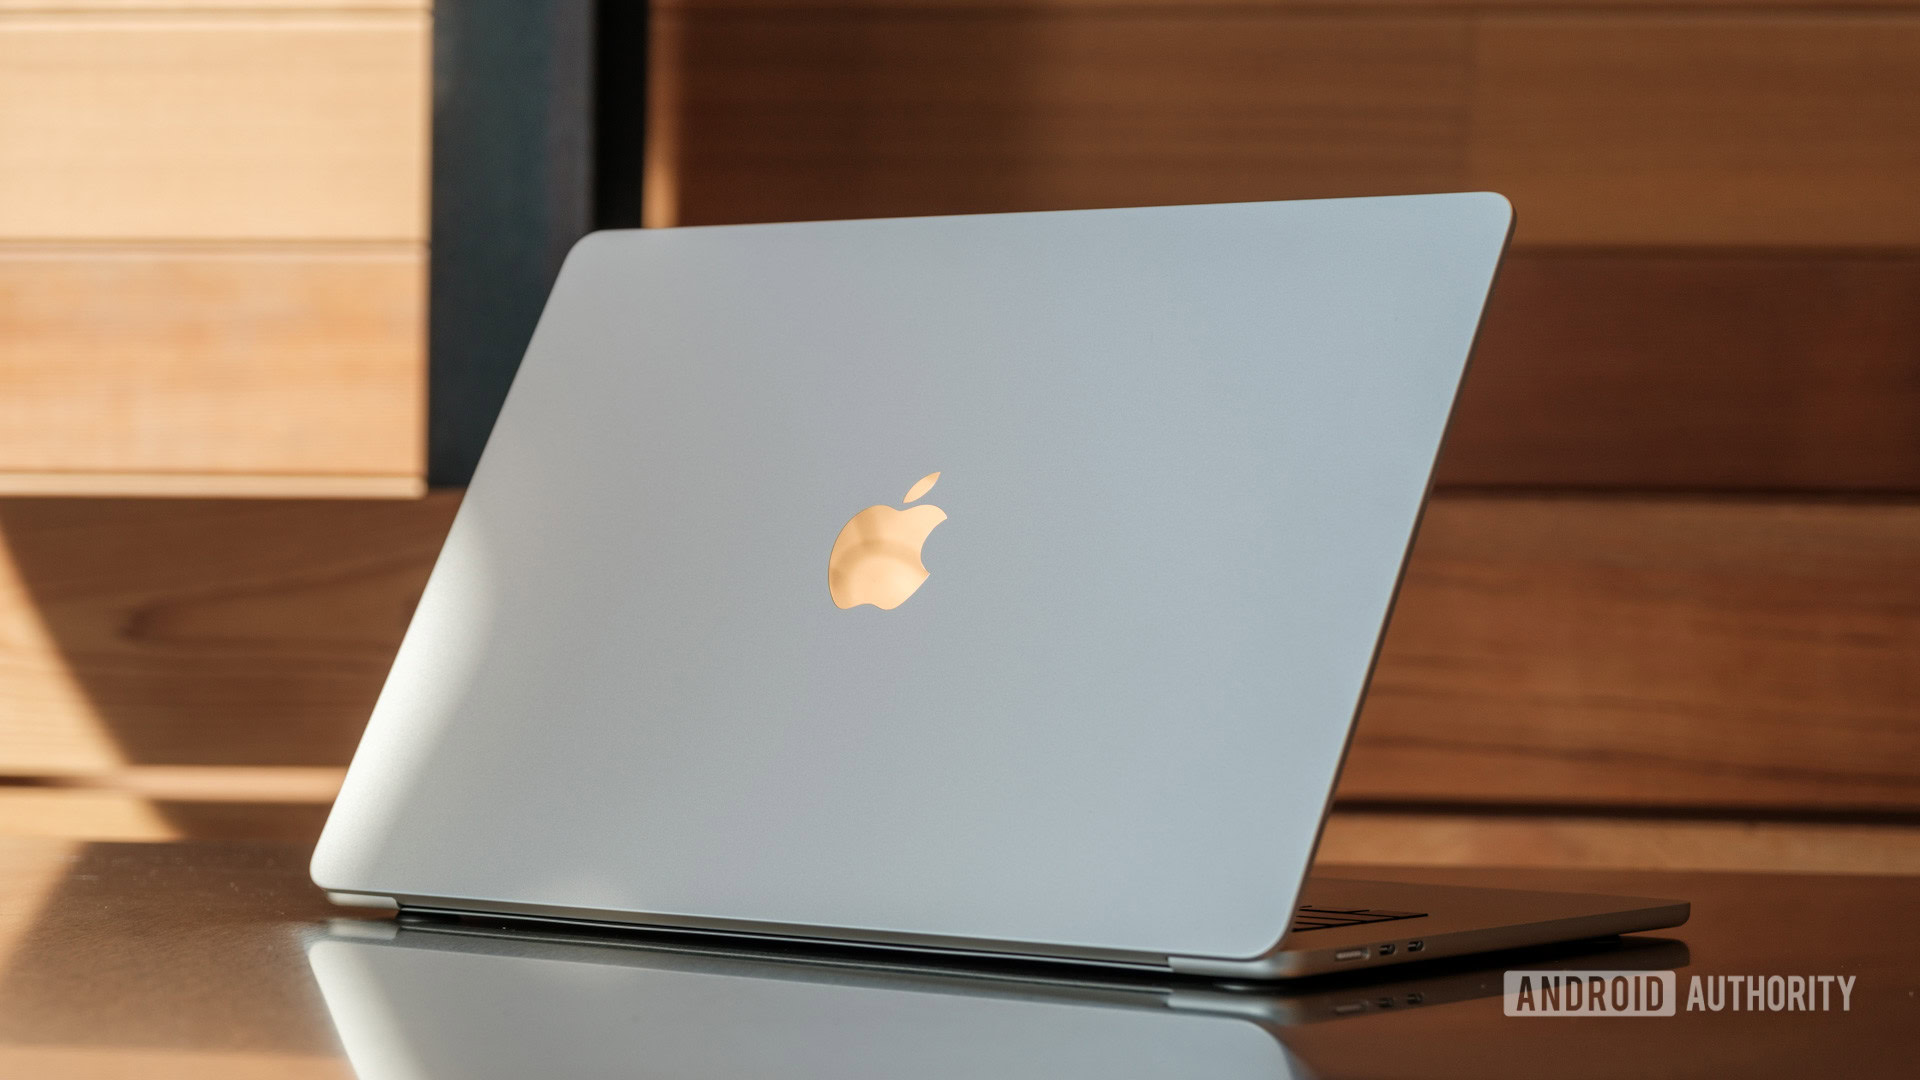 New MacBook Pros Offer Up to 10 Hours Longer Battery Life Than